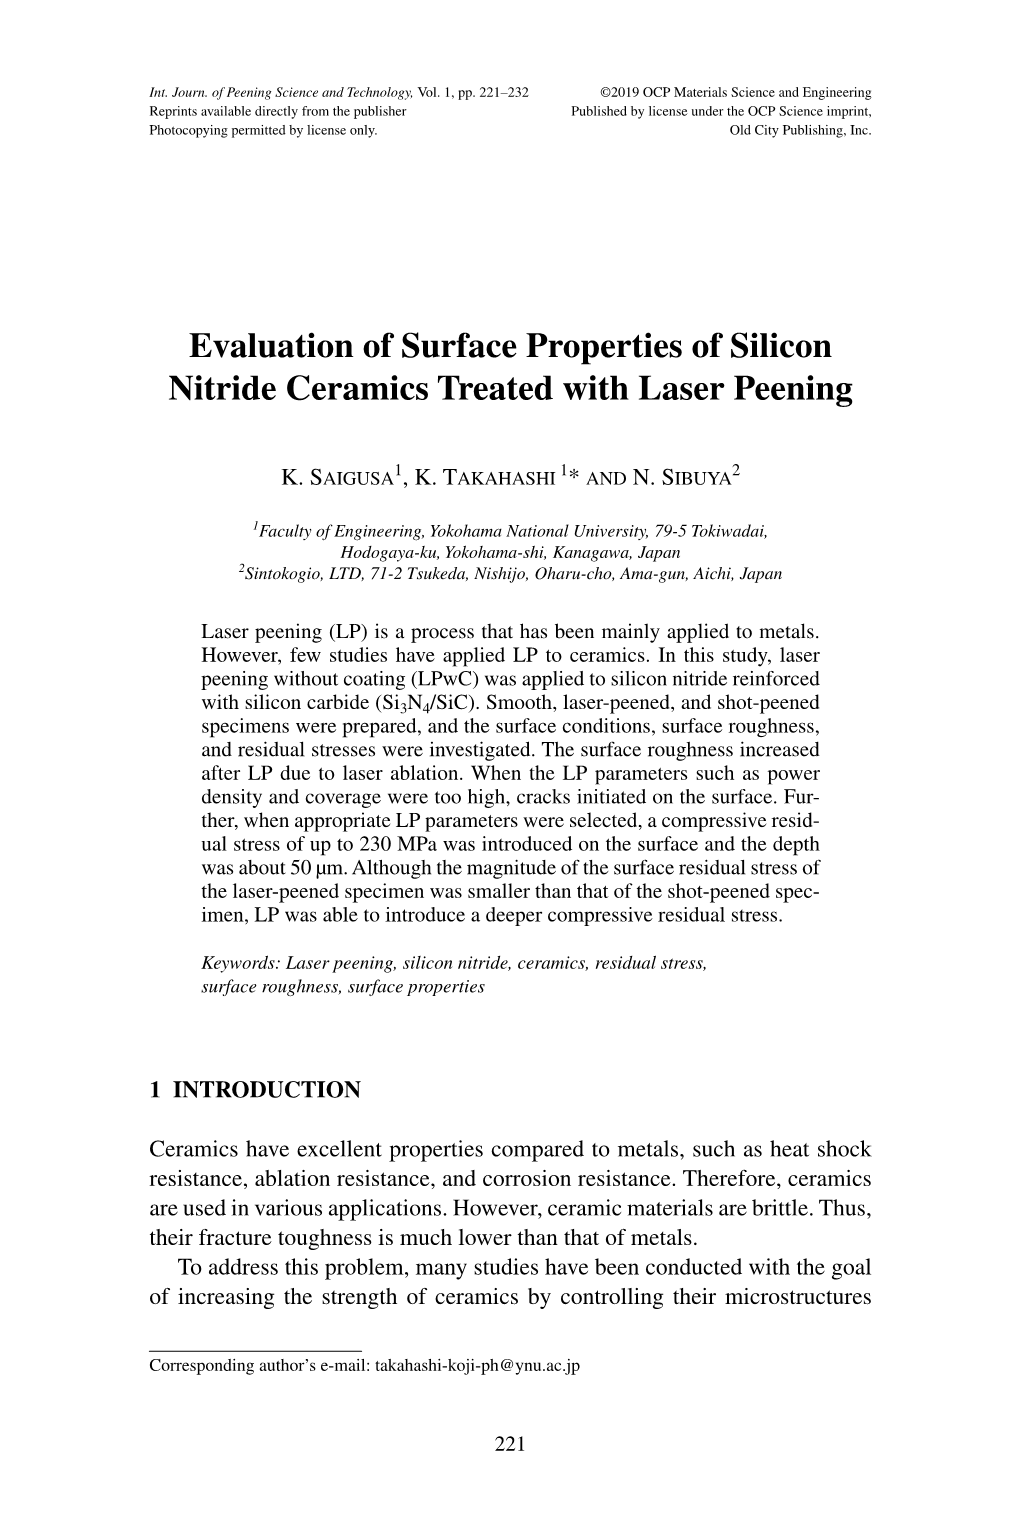 Evaluation of Surface Properties of Silicon Nitride Ceramics Treated with Laser Peening